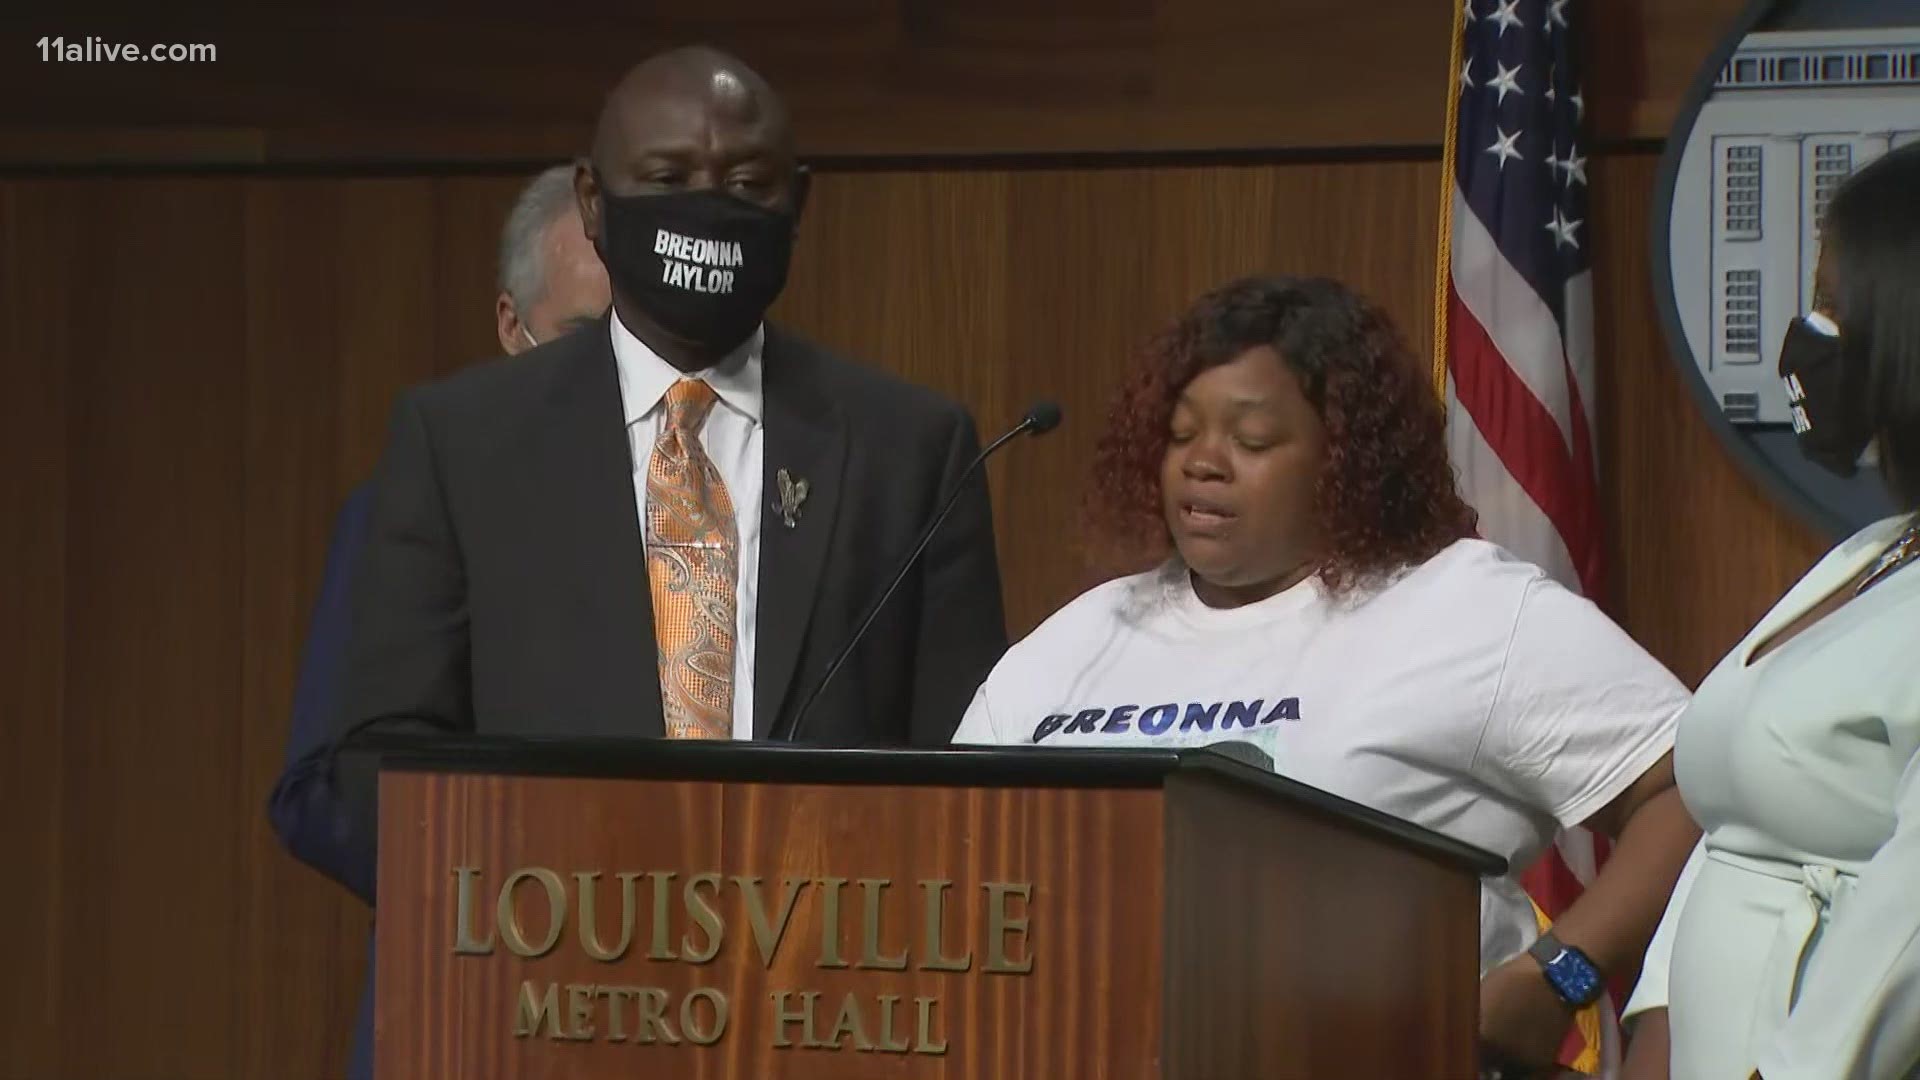 The city of Louisville, Civil Rights attorney Ben Crump on Tuesday announced a $12 million settlement with Breonna Taylor's family.